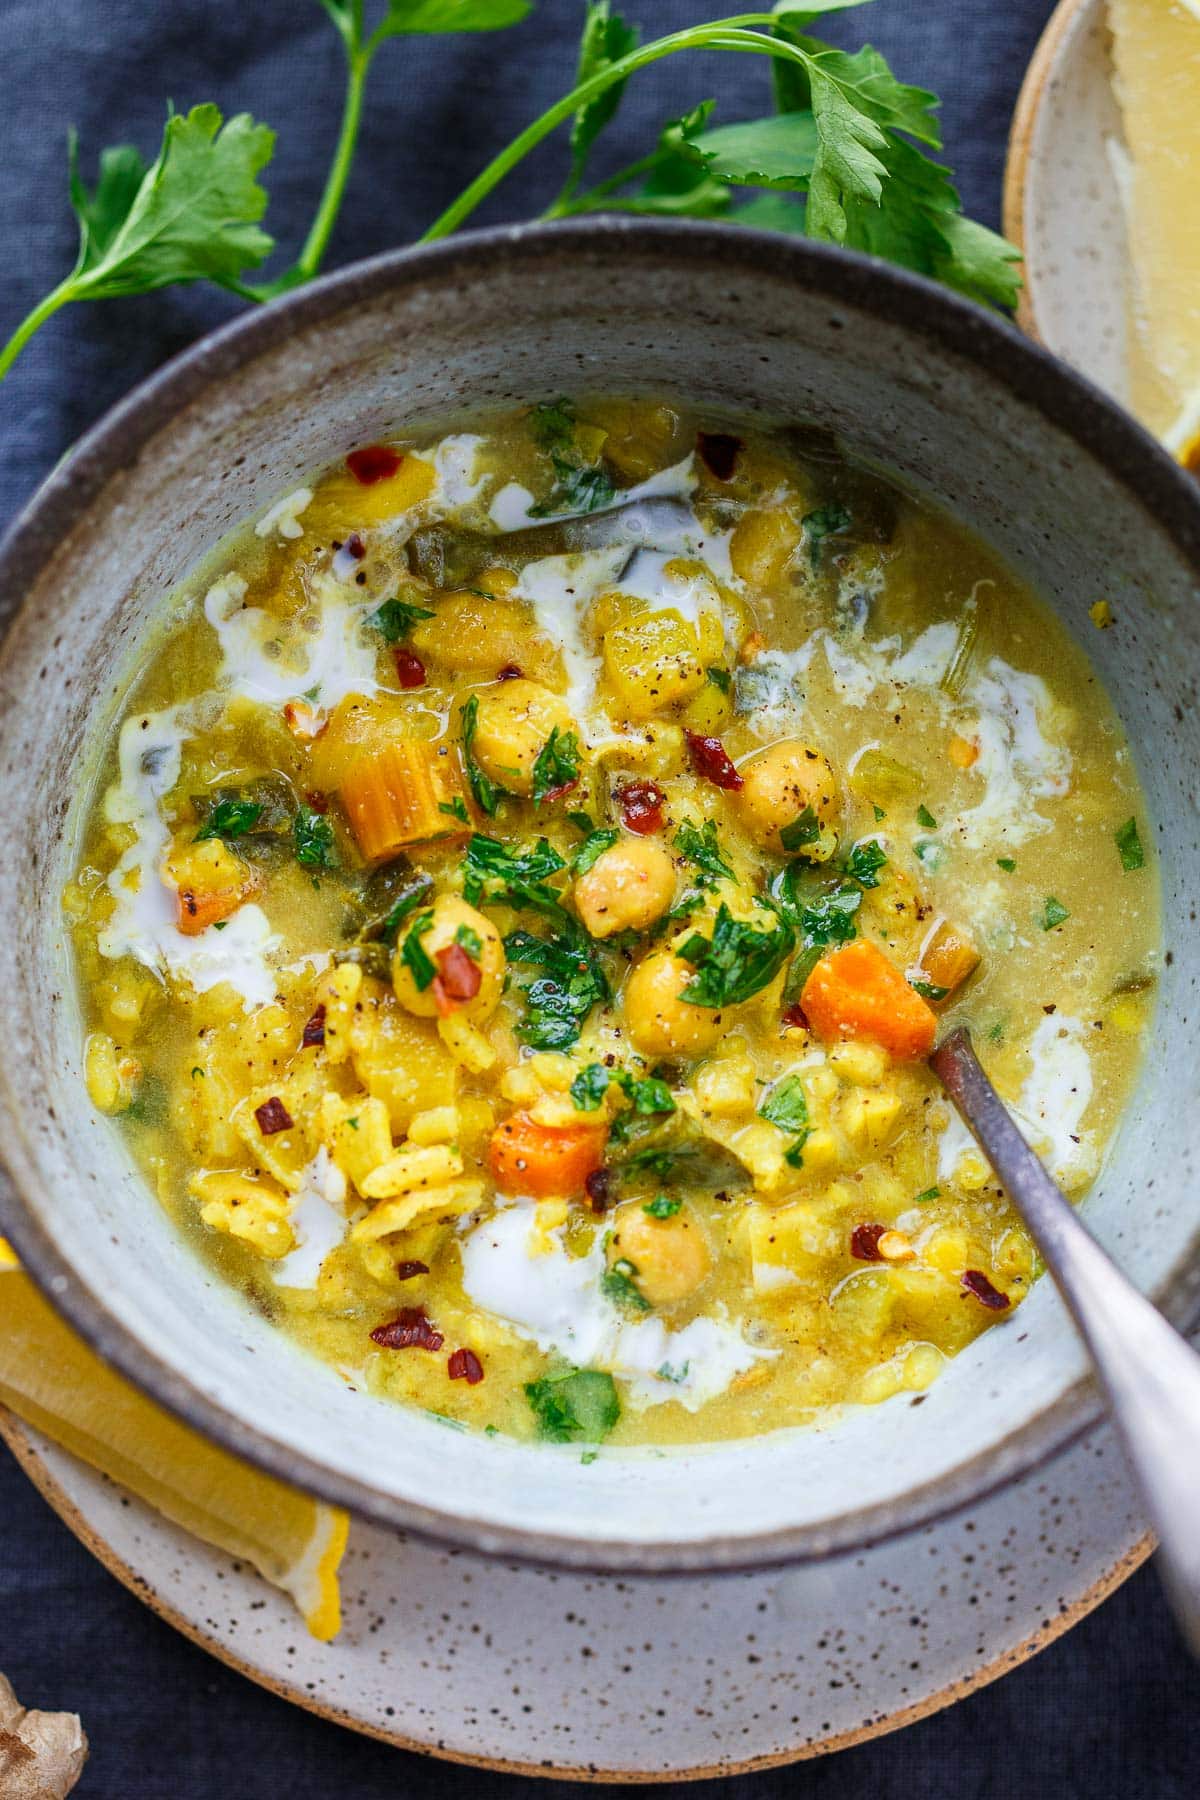 This creamy vegan Chickpea Soup recipe is like sunshine in a bowl. Made with veggies and rice in a golden turmeric coconut milk broth. A cheery soup for cozy winter days. Gluten-free.